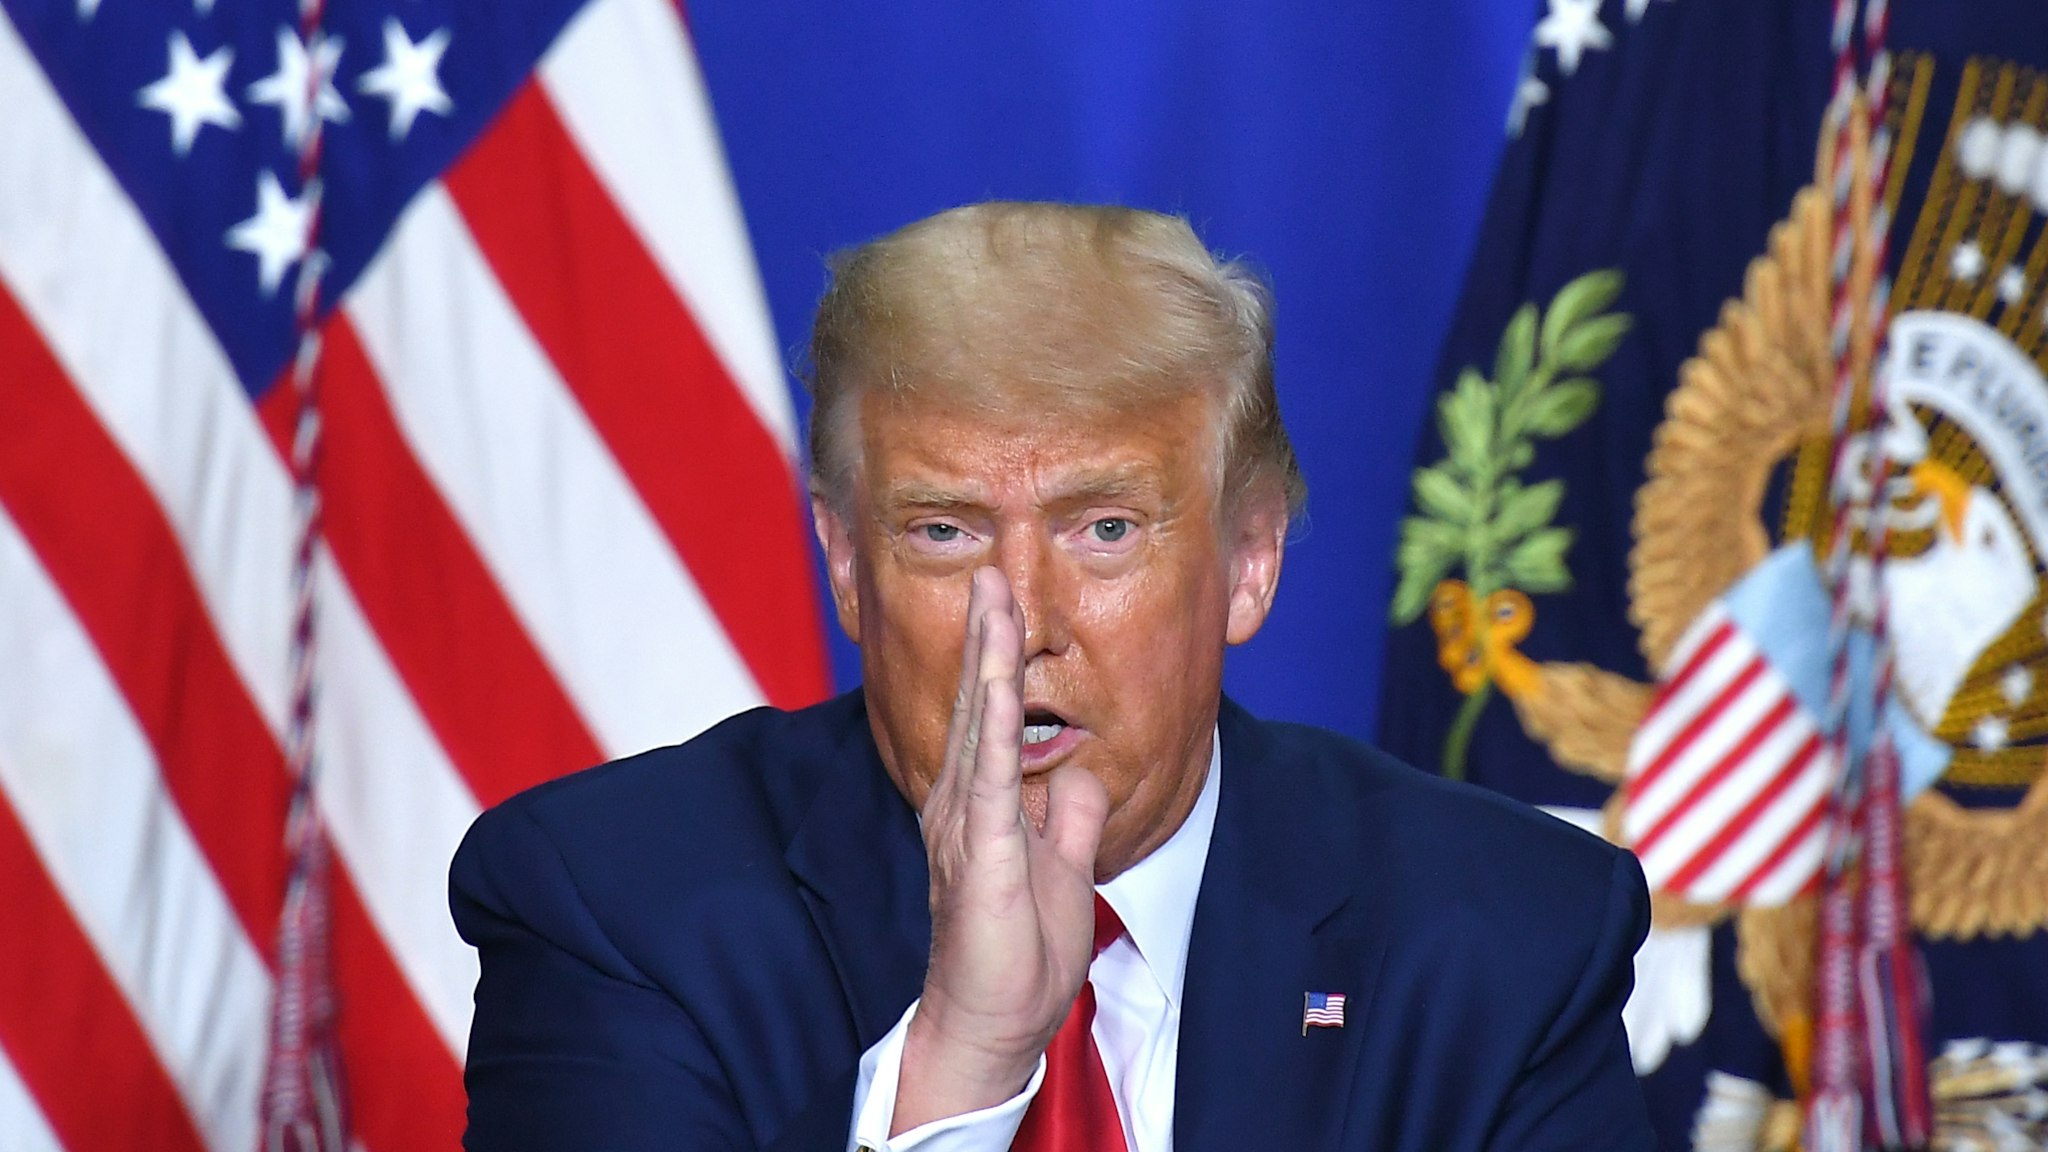 TOPSHOT - US President Donald Trump speaks to officials during a roundtable discussion on community safety, at Mary D. Bradford High School in in Kenosha, Wisconsin on September 1, 2020. - Trump in Kenosha says violent anti-police protests were 'domestic terror.'